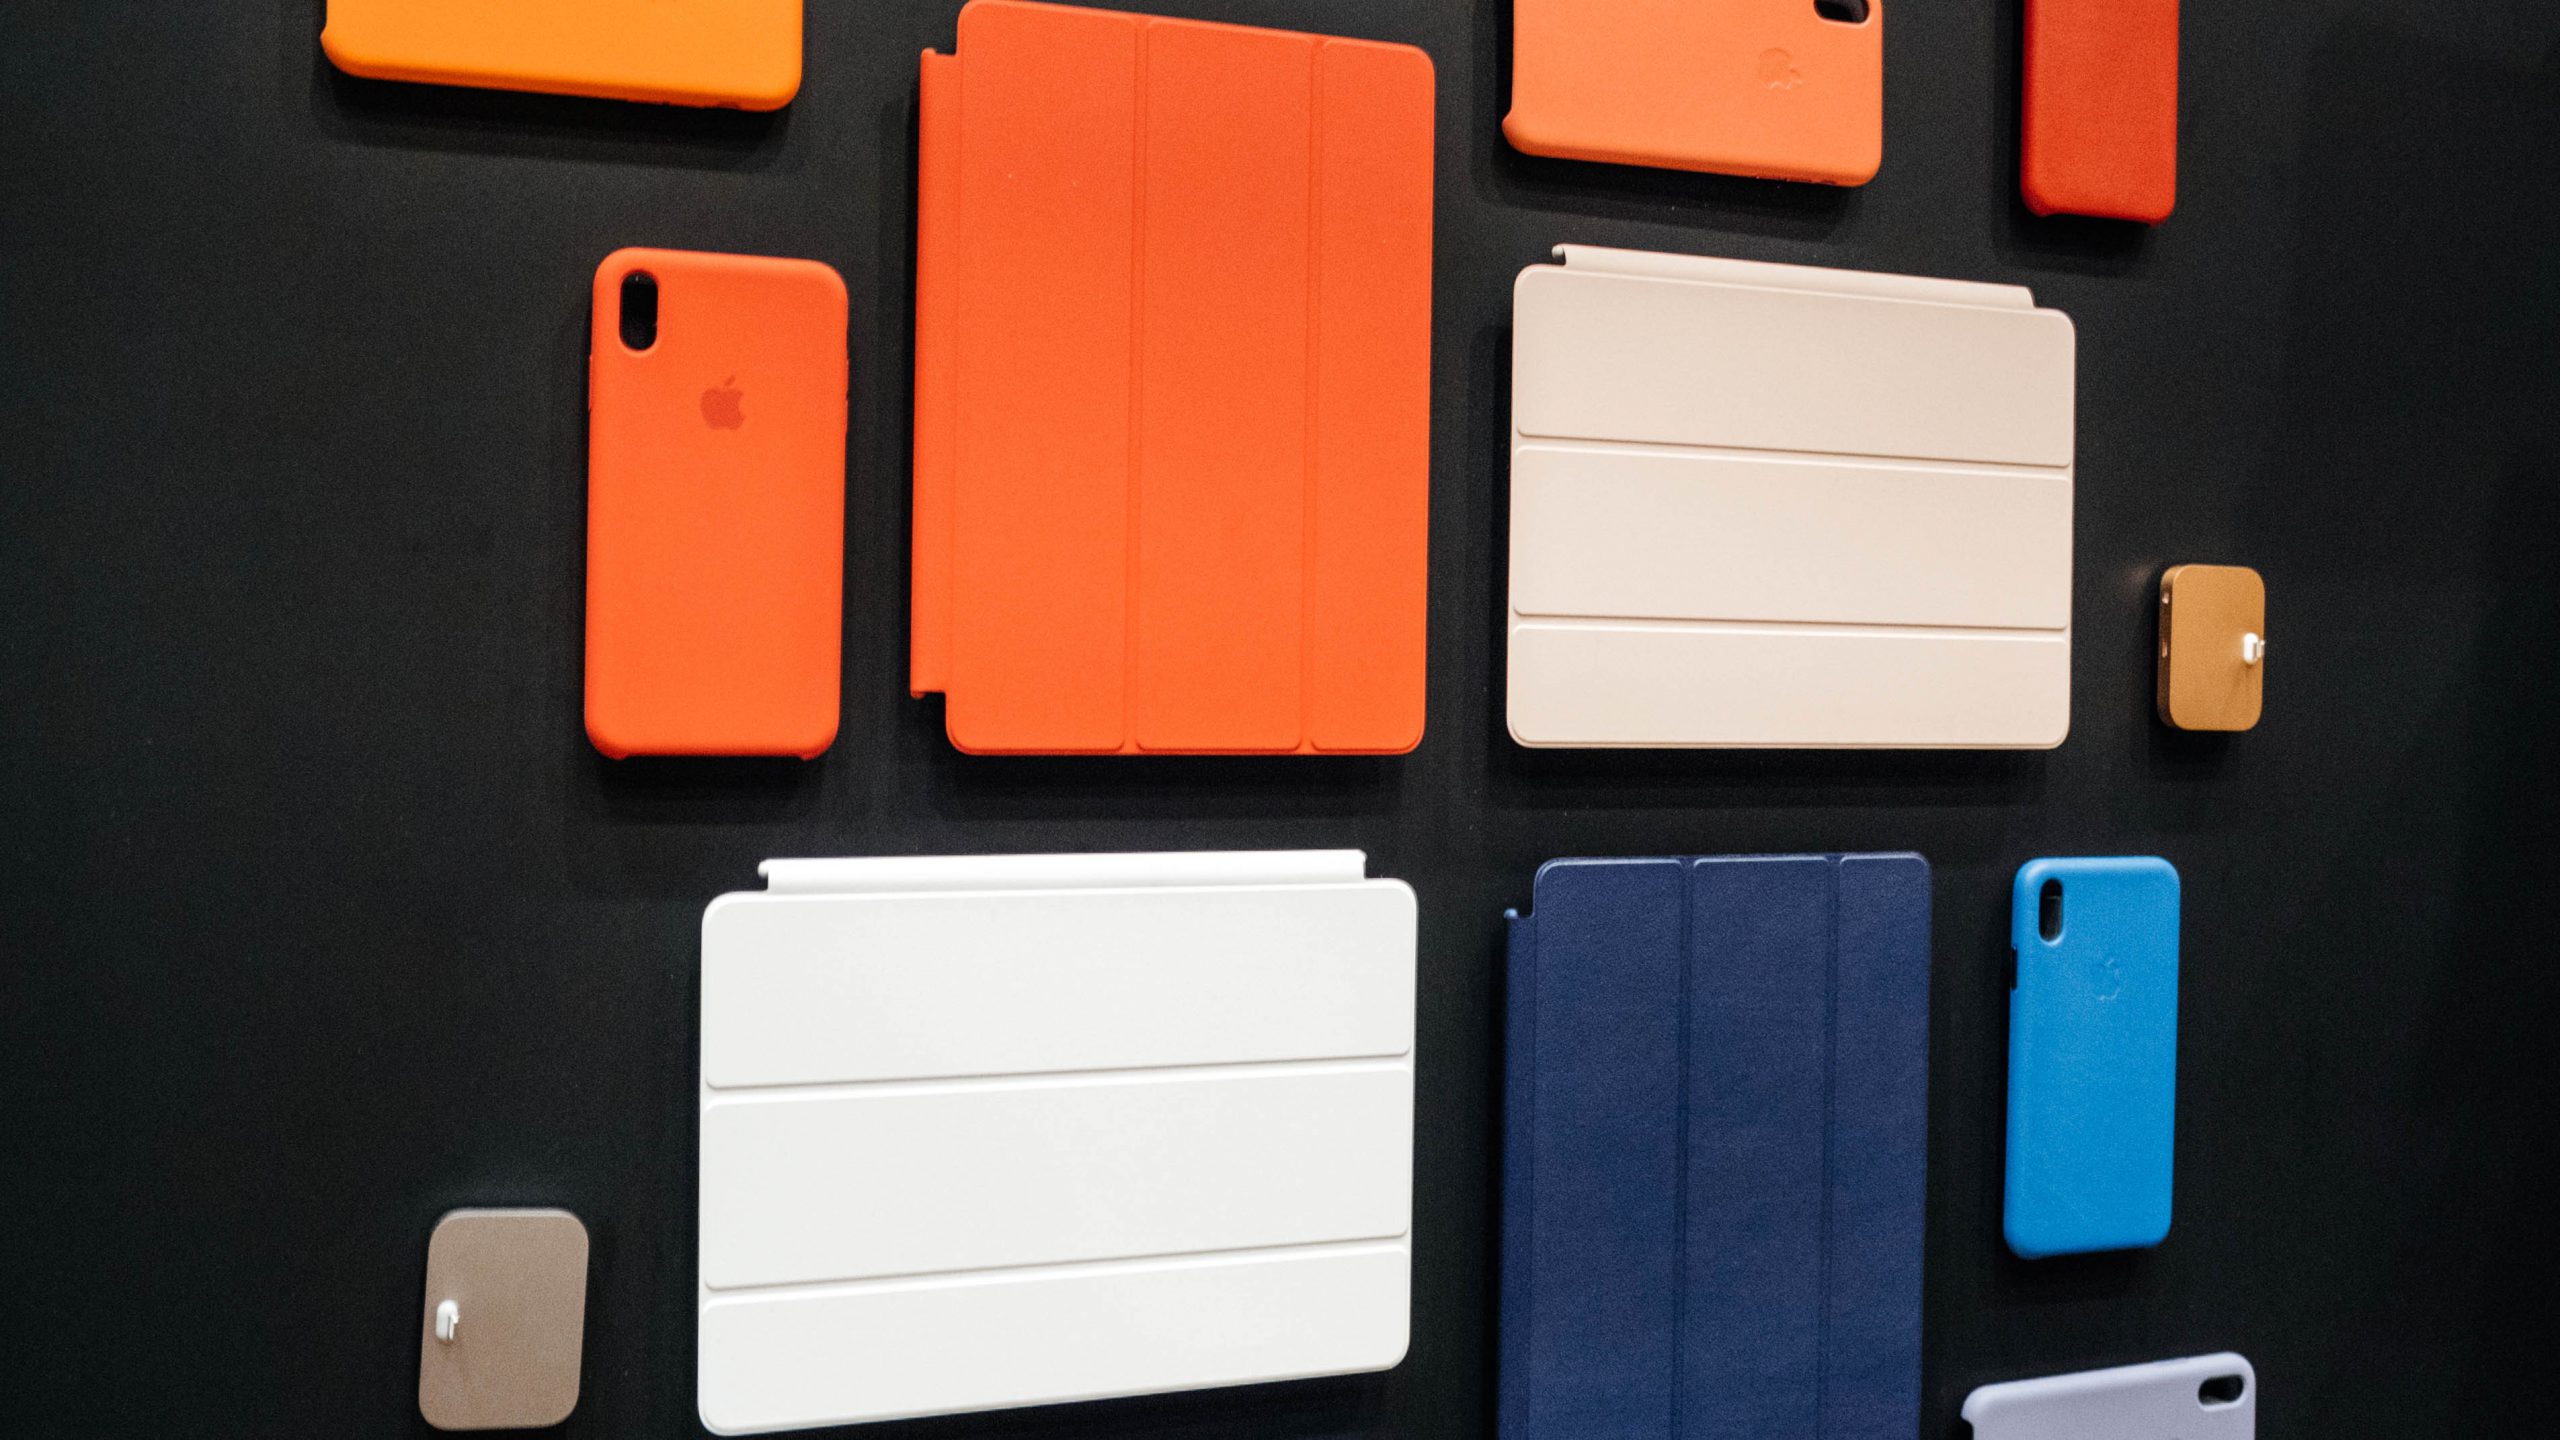 ipad pro cases in orange white and blue on a dark grey background